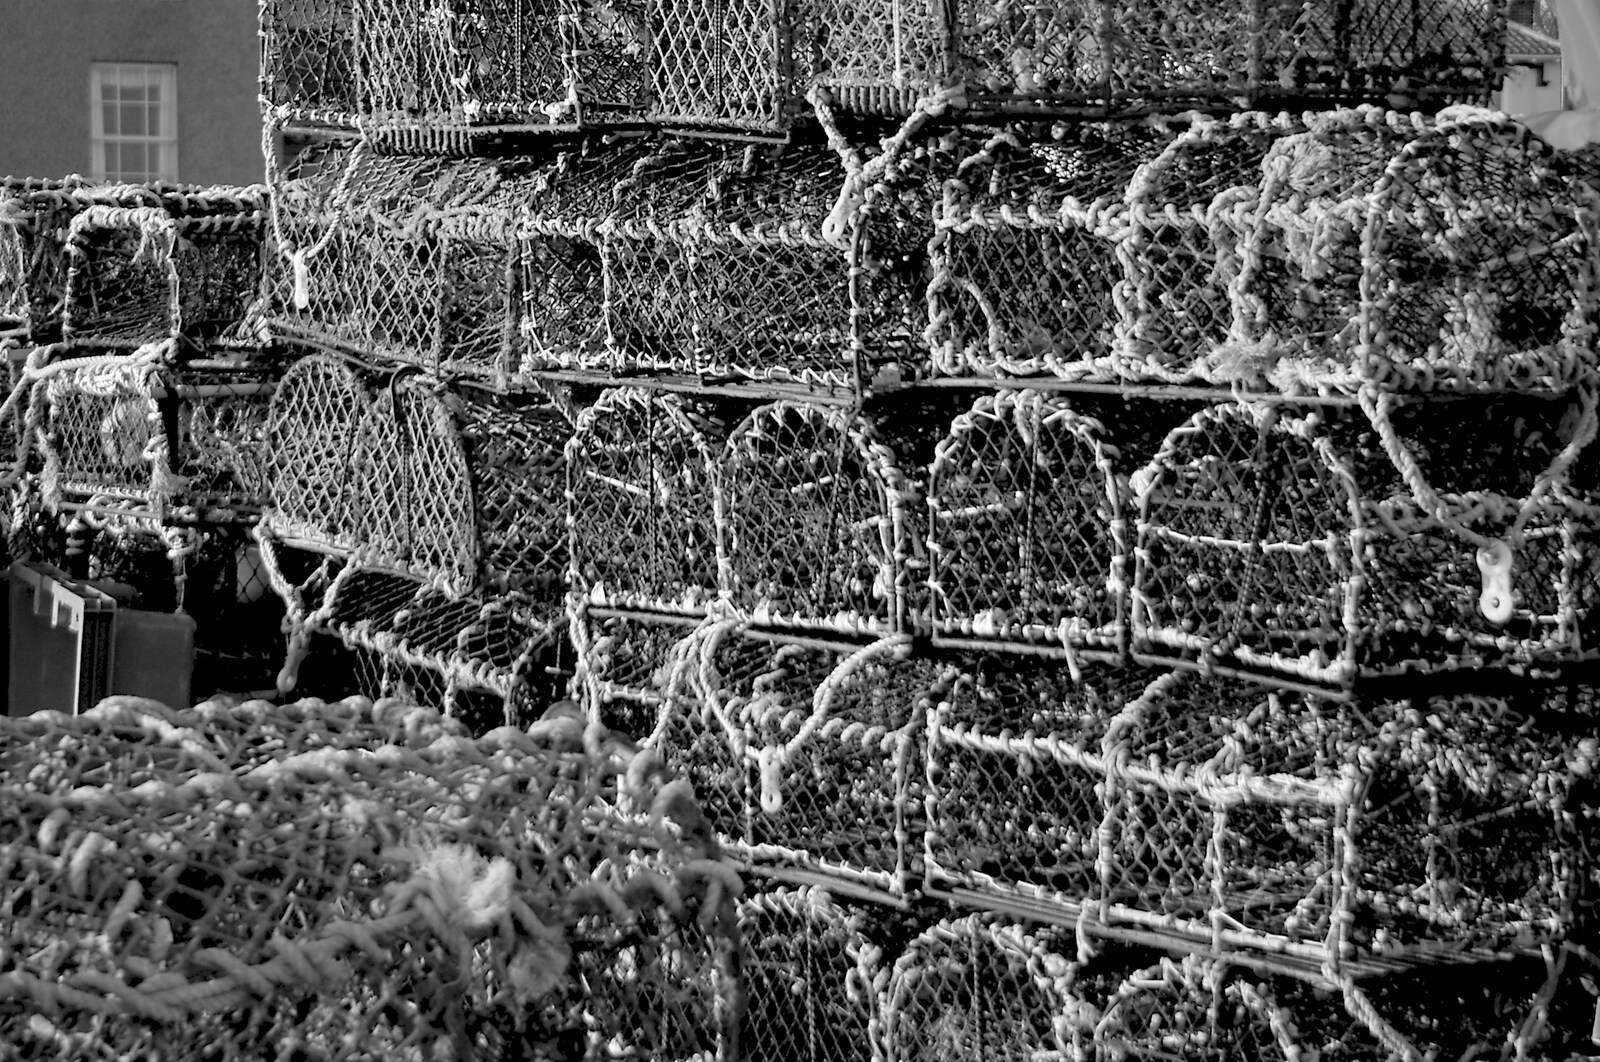 A big pile of lobster pots from A Day with Sis, Matt and the Old Man, Saxmundham, Suffolk - 28th December 2004